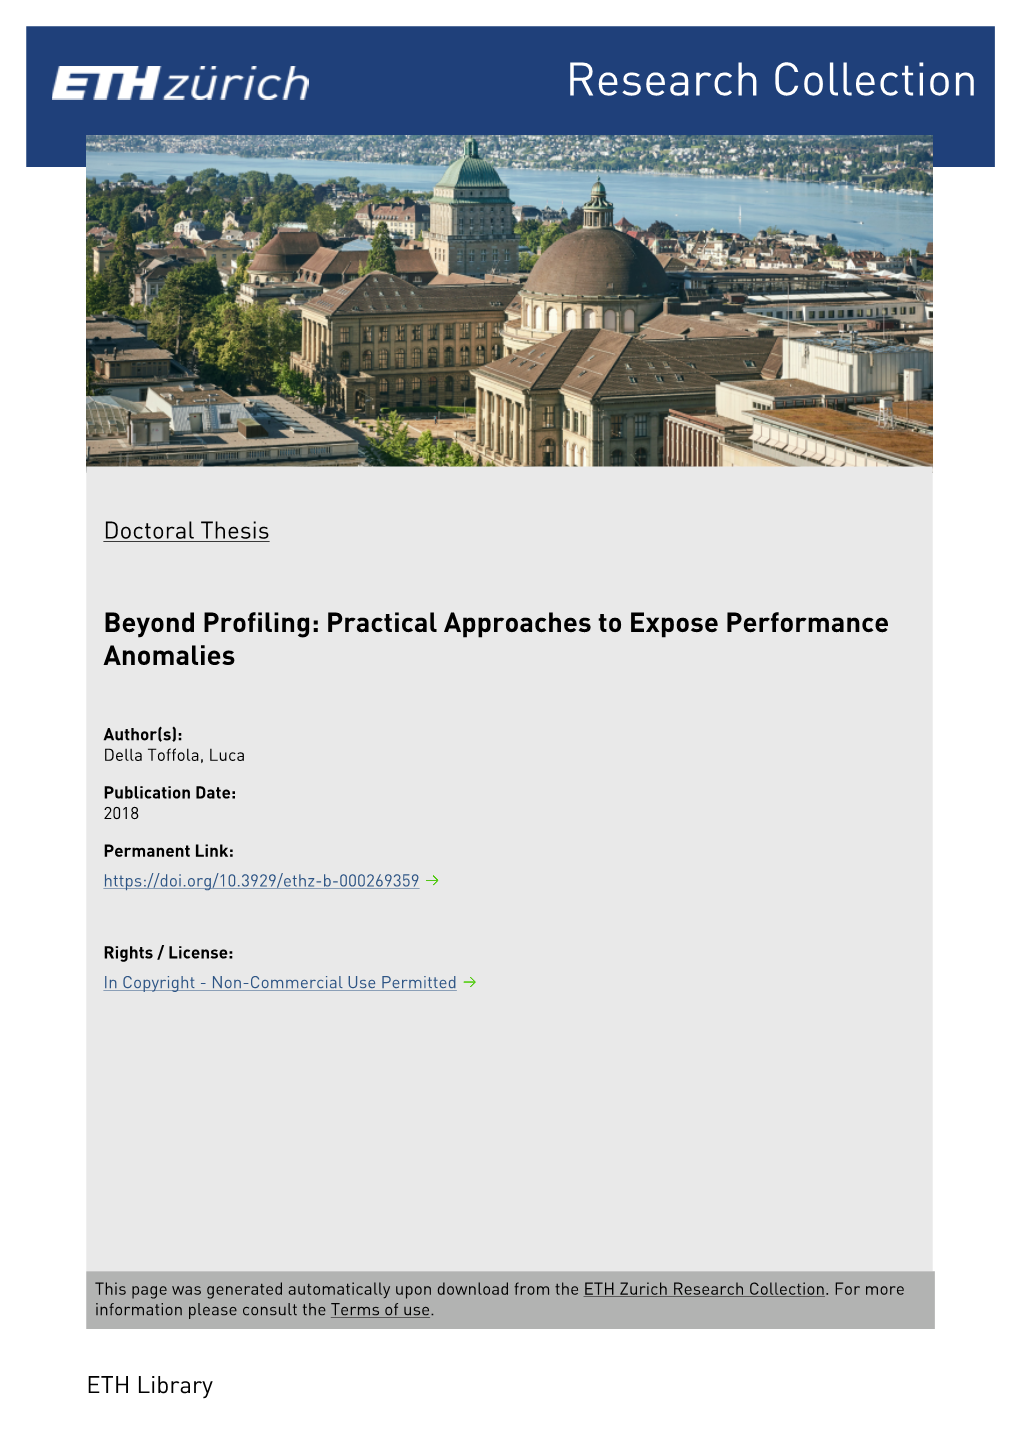 Practical Approaches to Expose Performance Anomalies